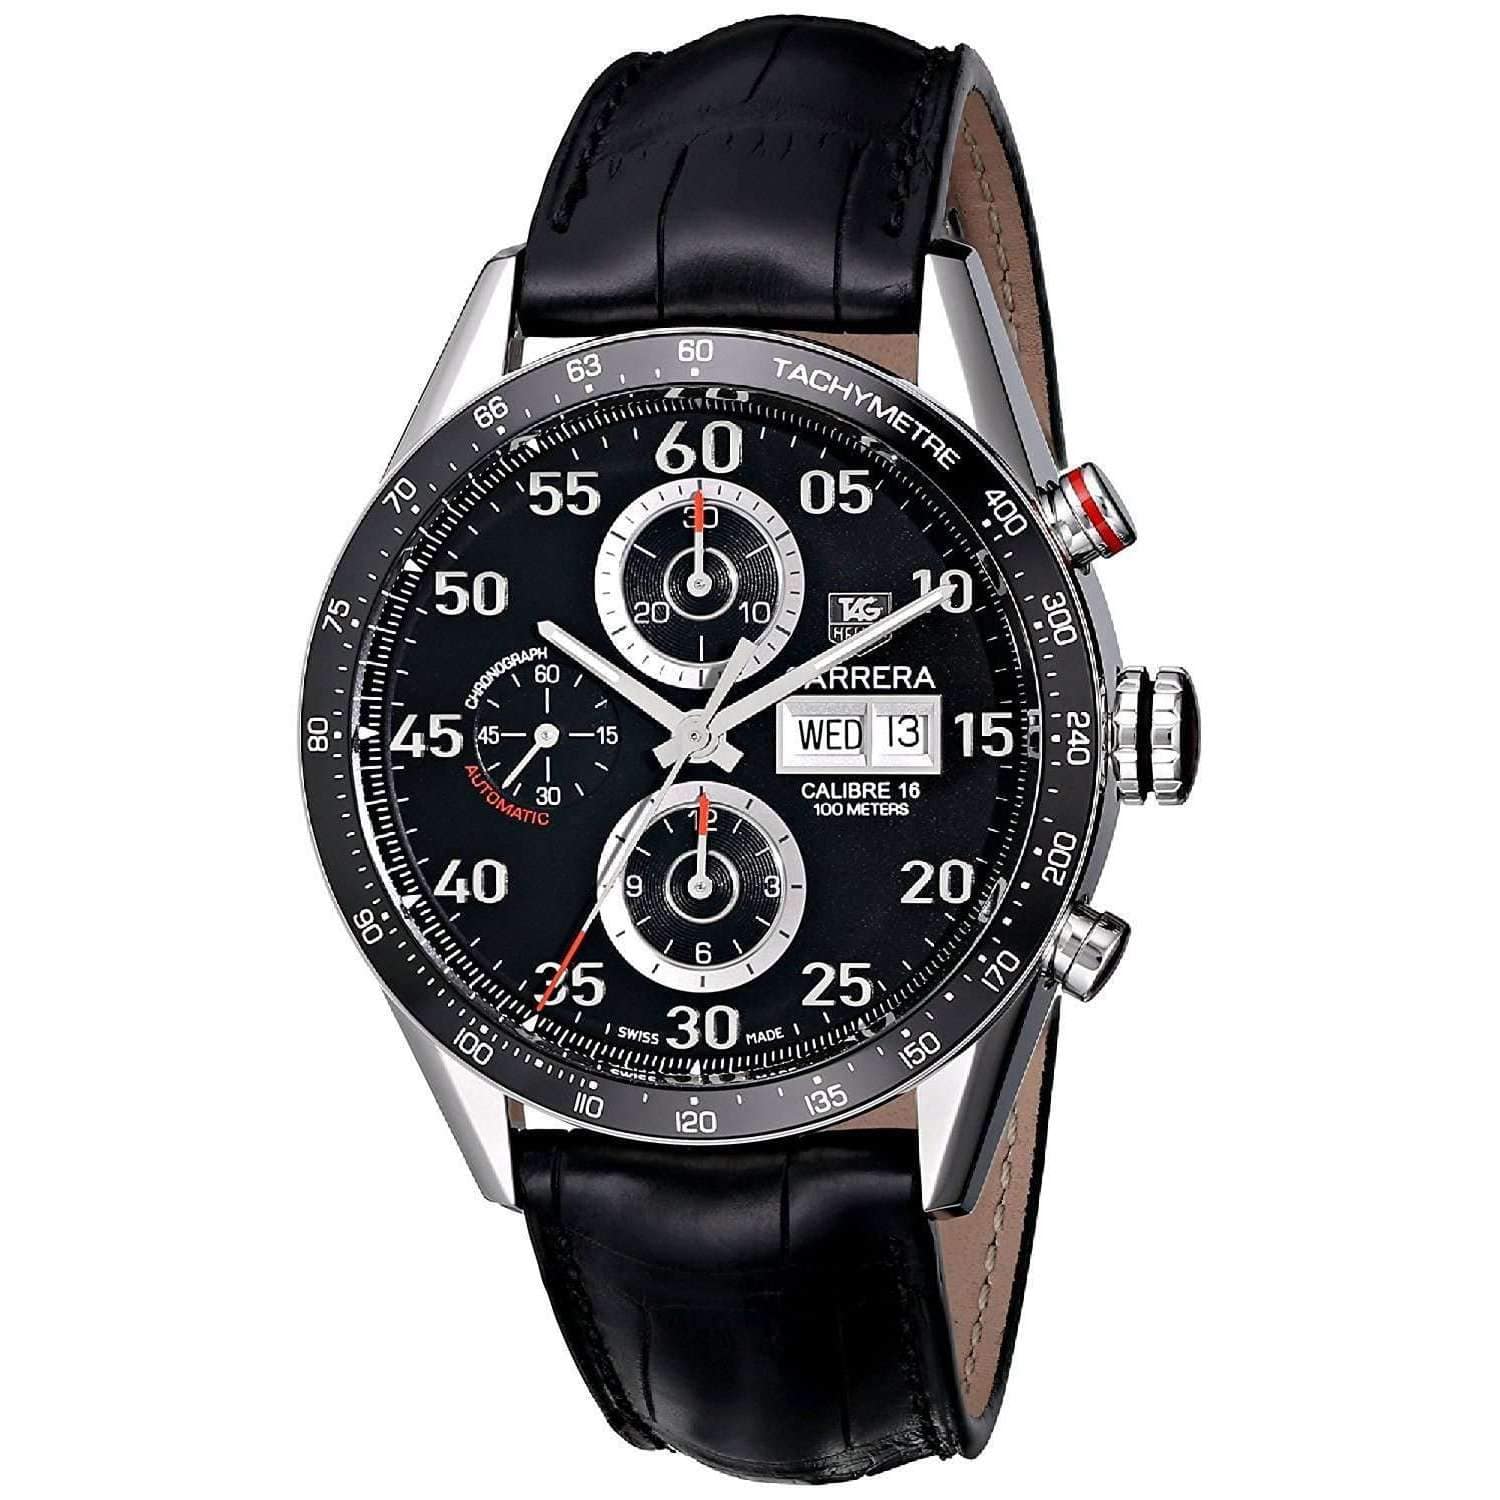 ROOK JAPAN:TAG HEUER CARRERA AUTOMATIC DAY-DATE MEN WATCH CV2A10.FC6235,Luxury Watch,Tag Heuer Carrera